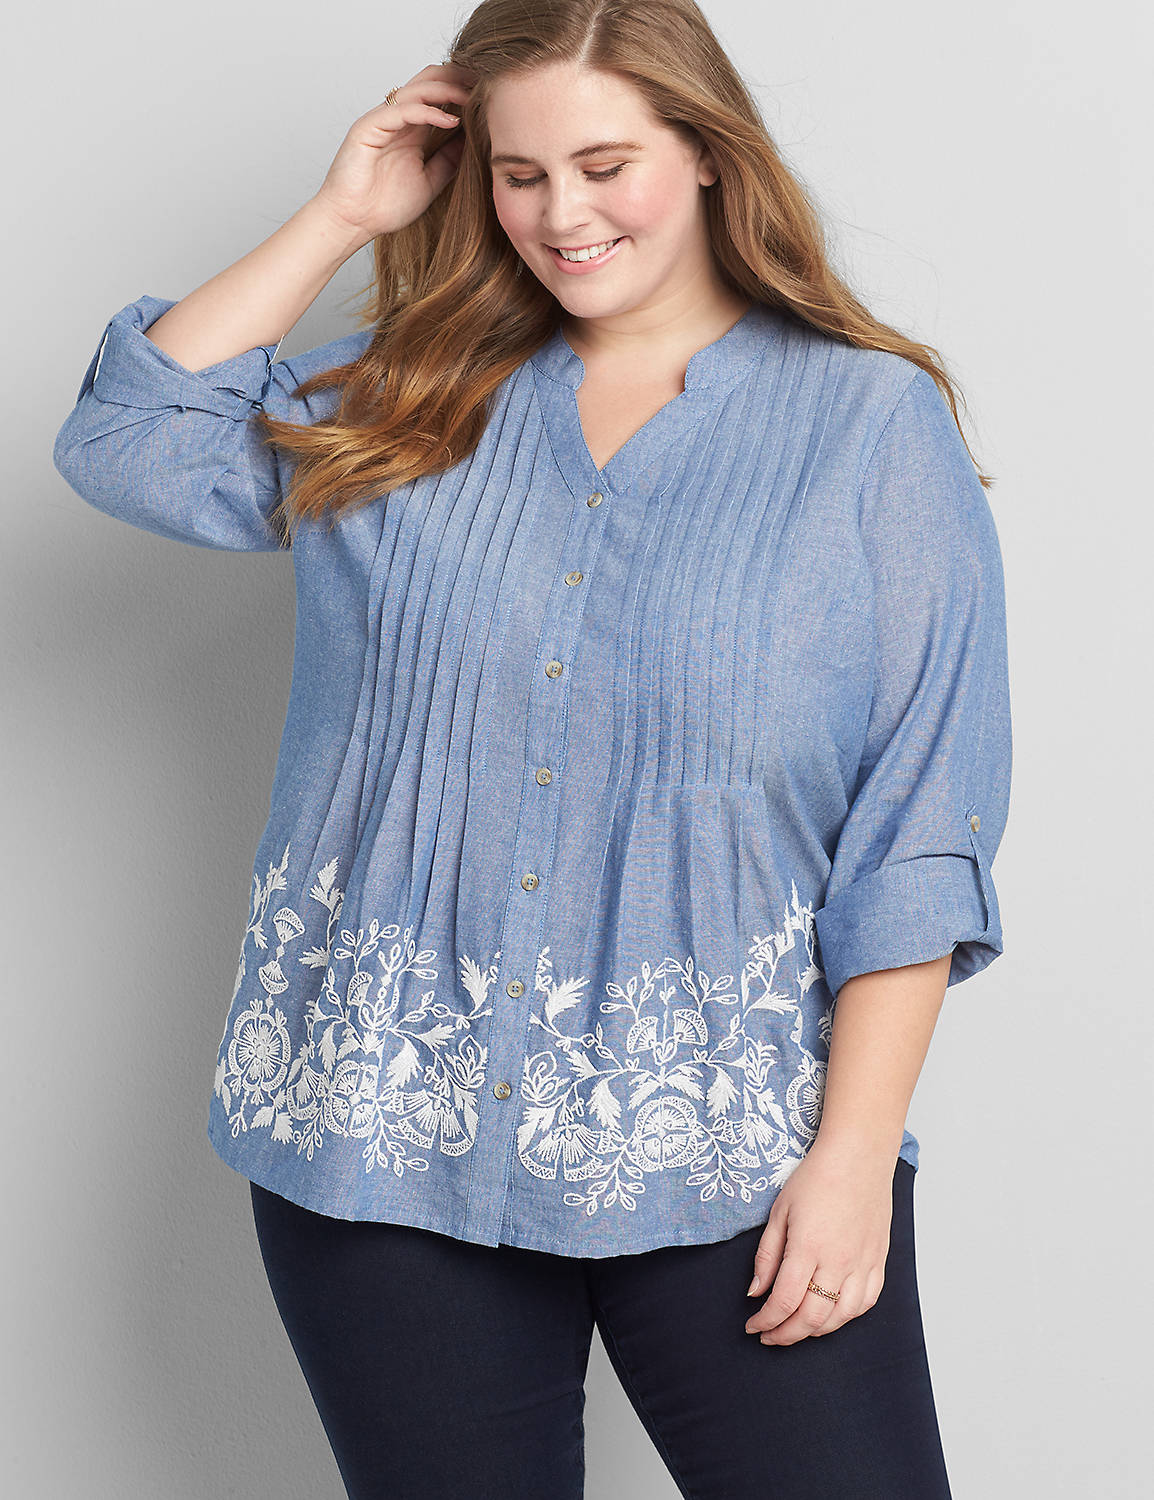 Long Sleeve Split Neck Button Front Embroidery Detail Blouse 1119390:Chambray:26/28 Product Image 1